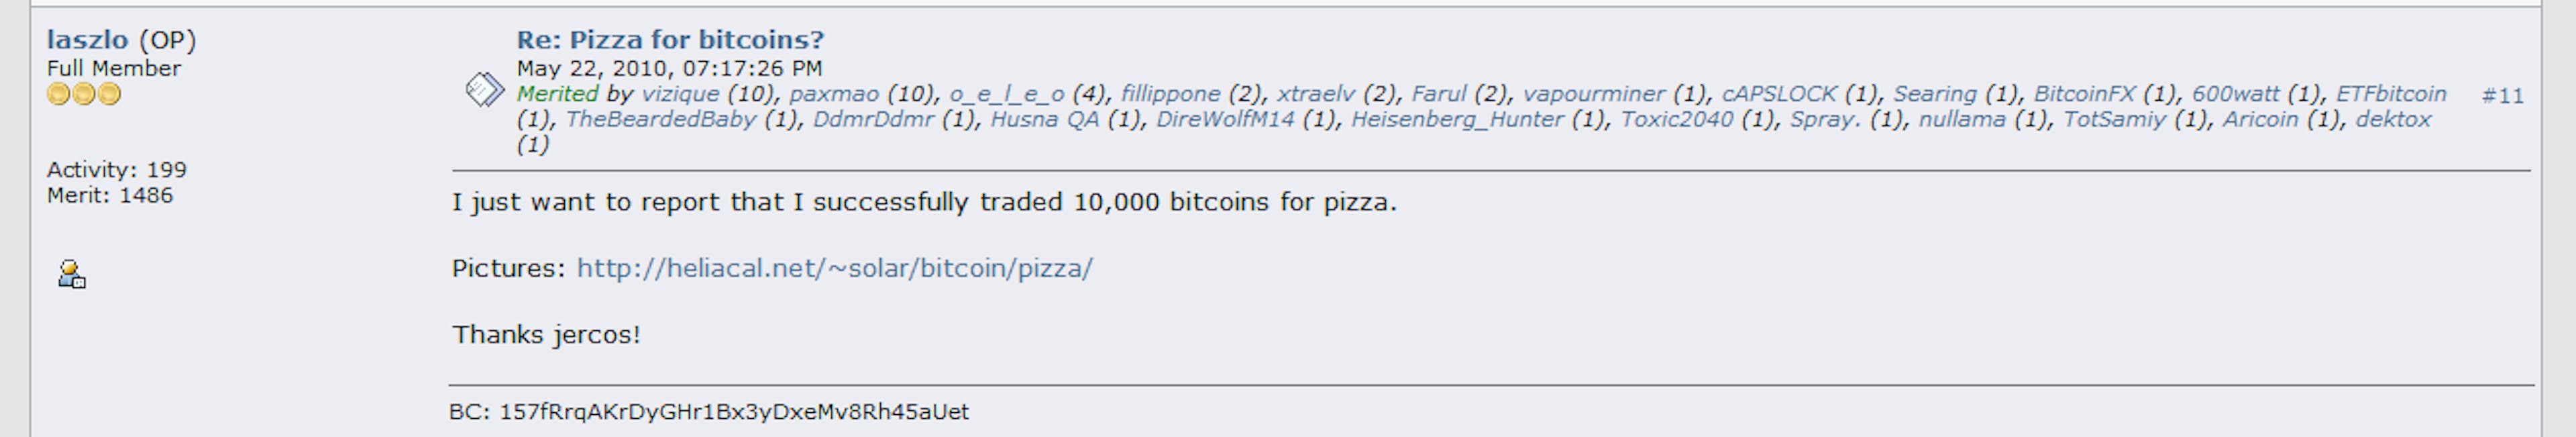 Laszlo Hanyecz (absolute legend) paid for two pizzas with 10,000 bitcoins. 